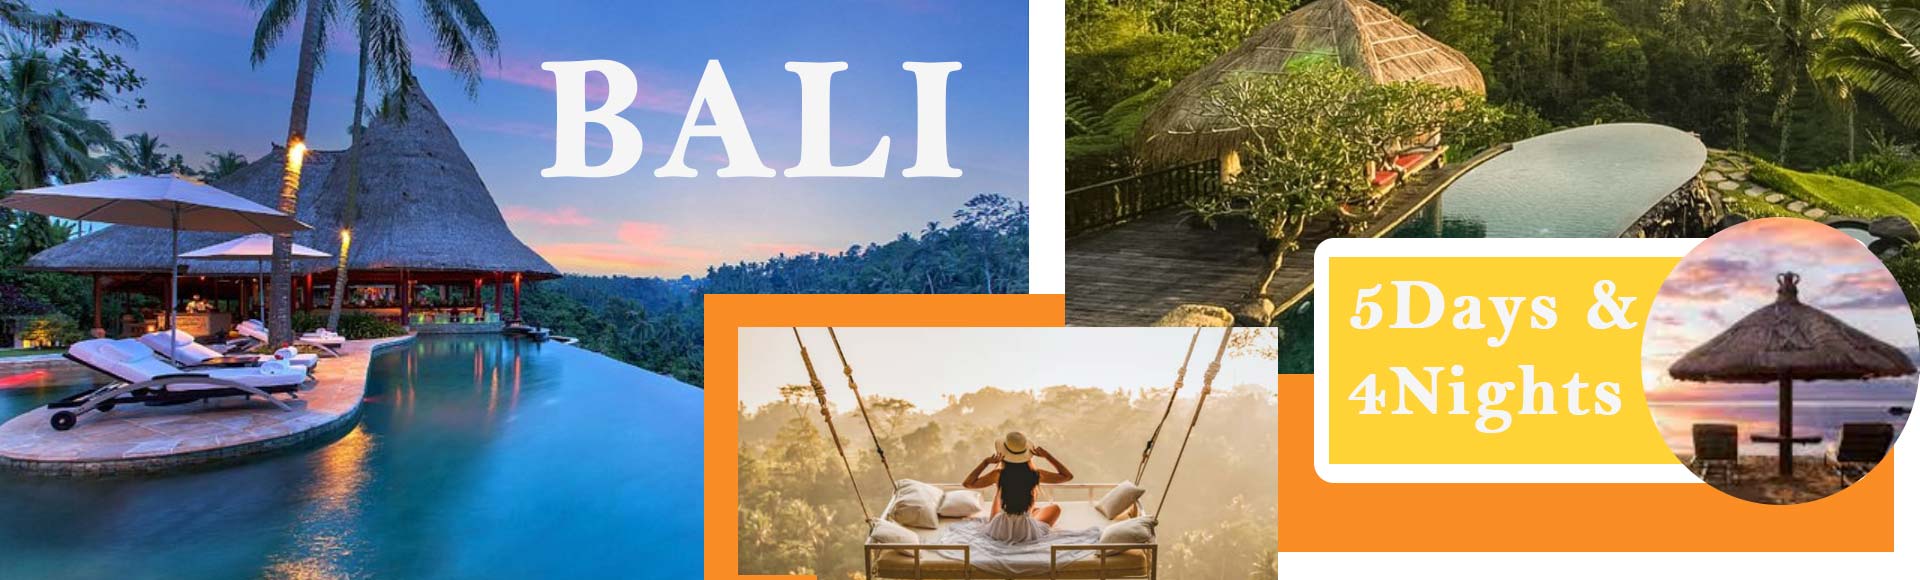 Bali tours holiday packages